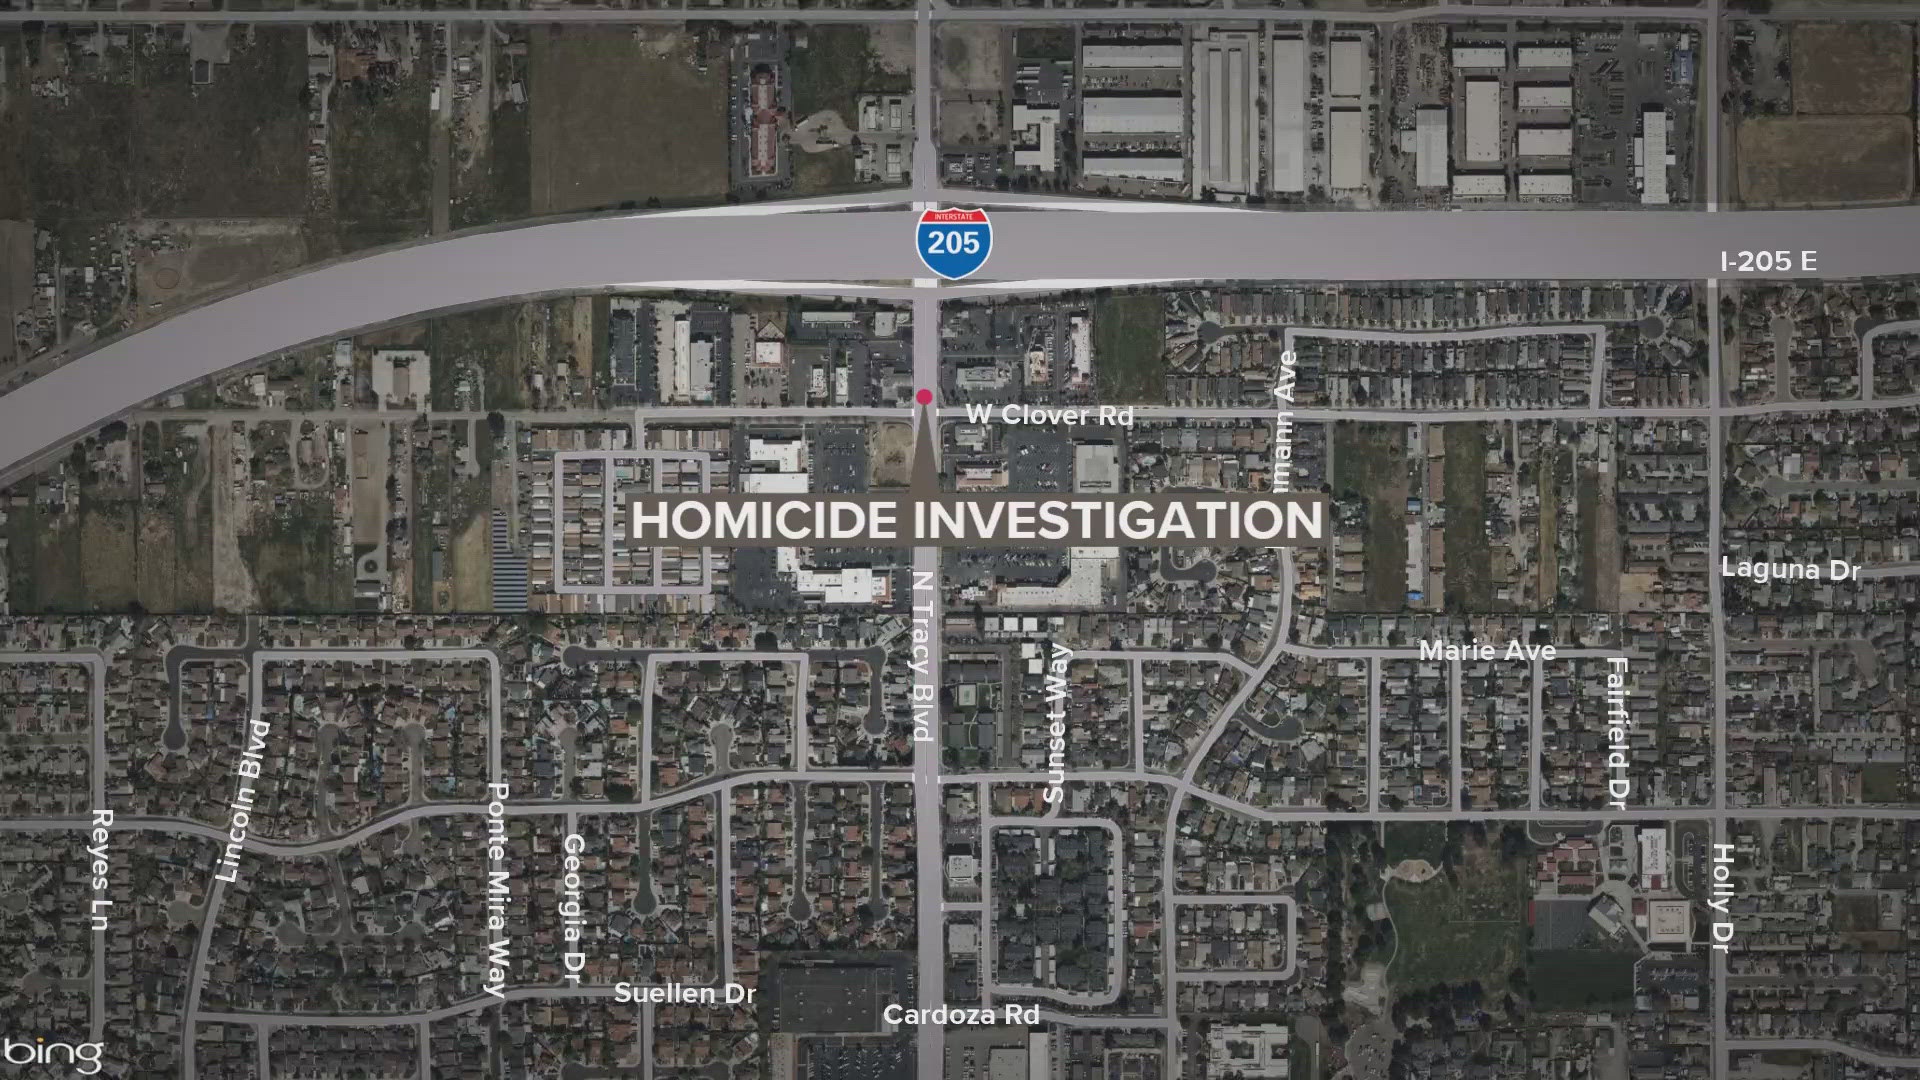 Police in Tracy are investigating after a person was killed Sunday and another was critically injured.